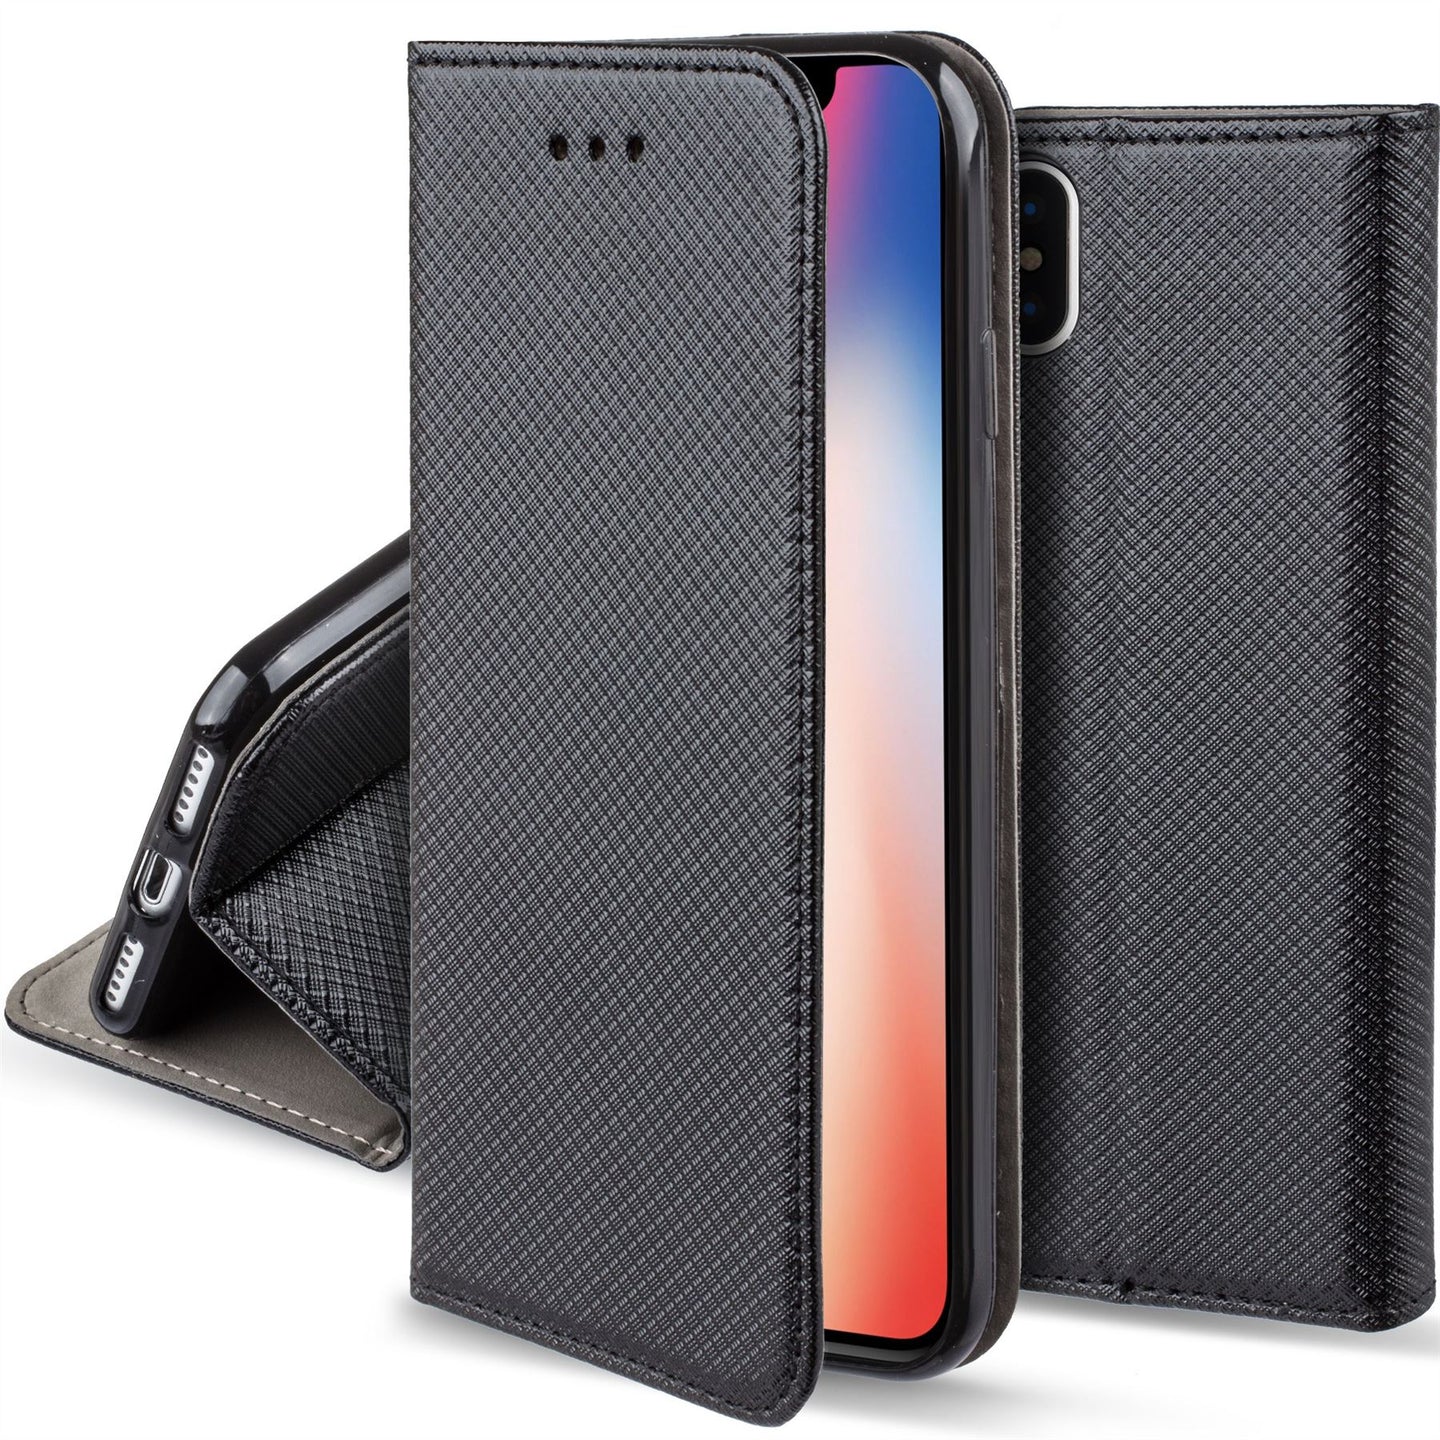 Moozy Case Flip Cover for iPhone X, iPhone XS, Black - Smart Magnetic Flip Case with Card Holder and Stand